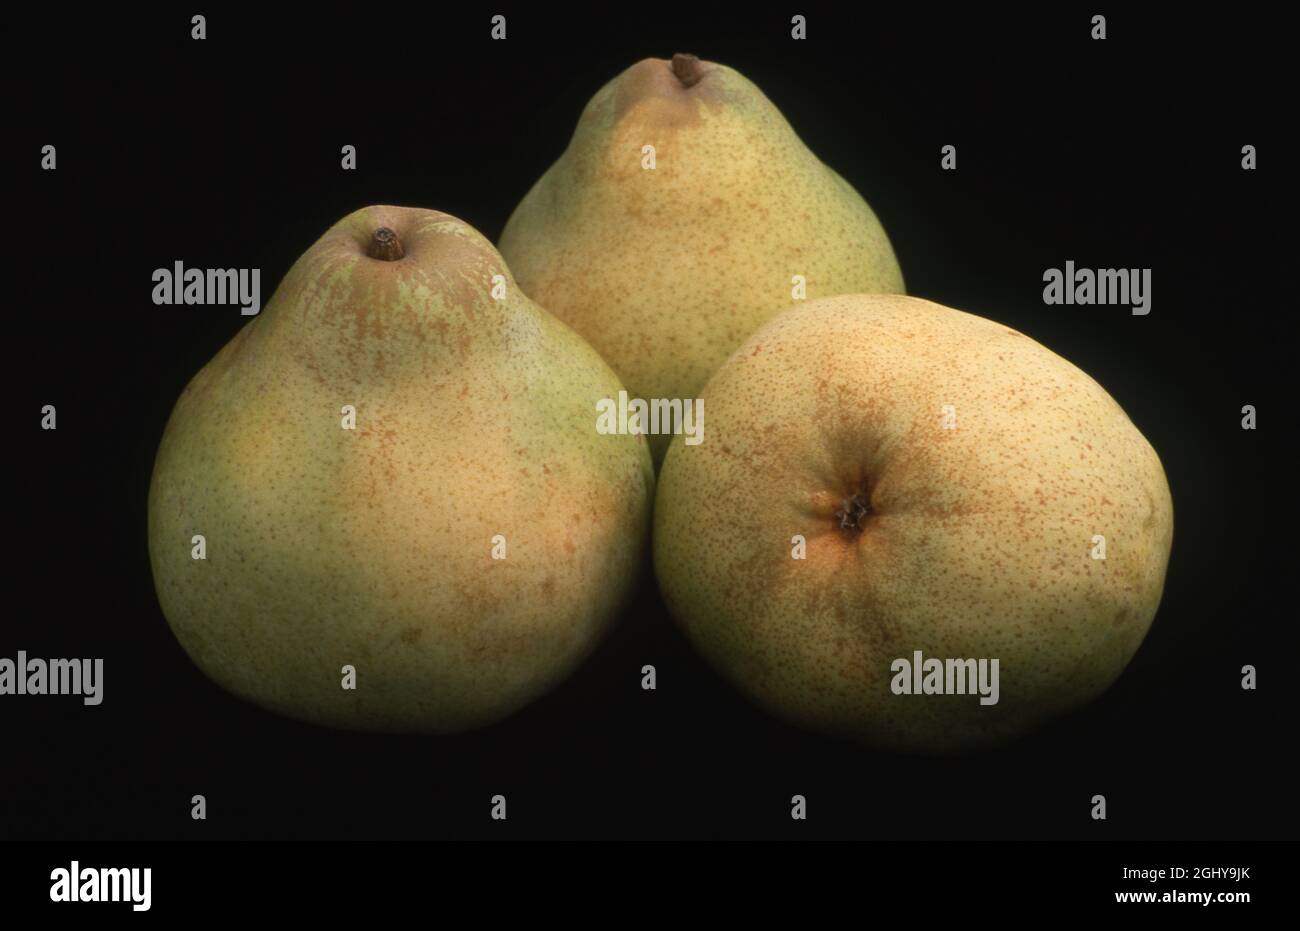 STUDIO IMAGE OF HARVESTED PEARS AGAINST A BLACK BACKGROUND Stock Photo